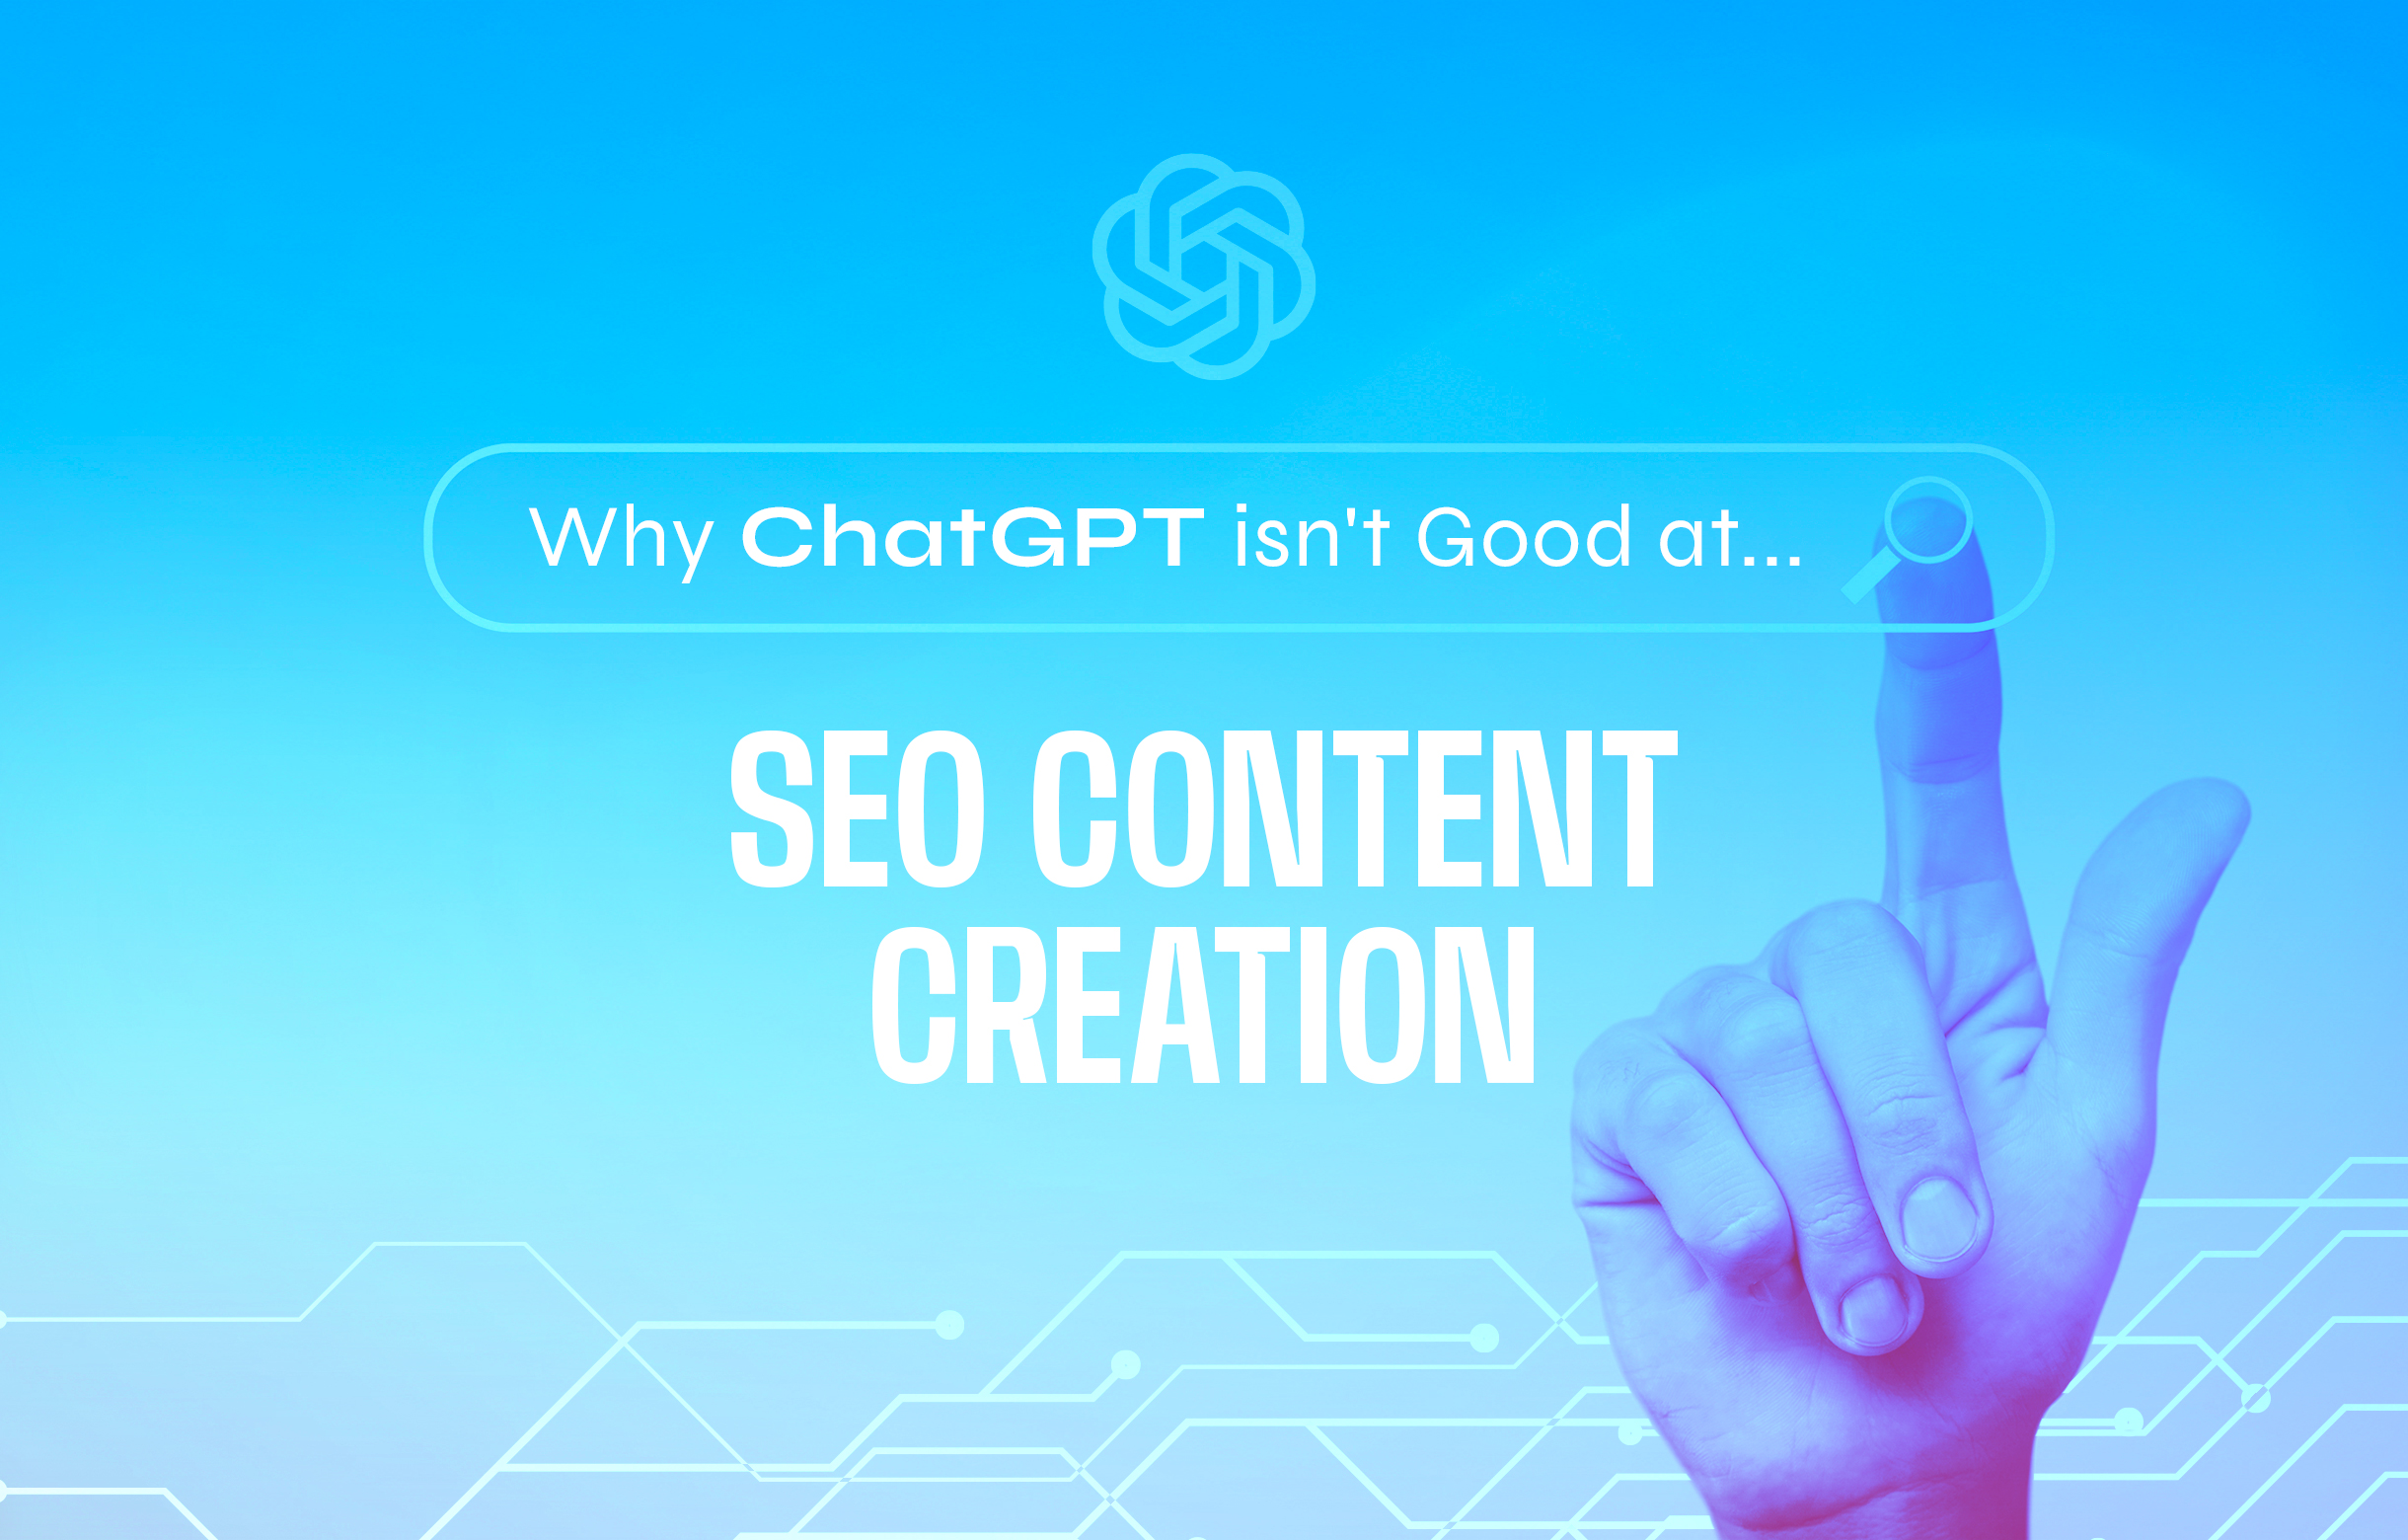 Why ChatGPT isn't Good at SEO content creation